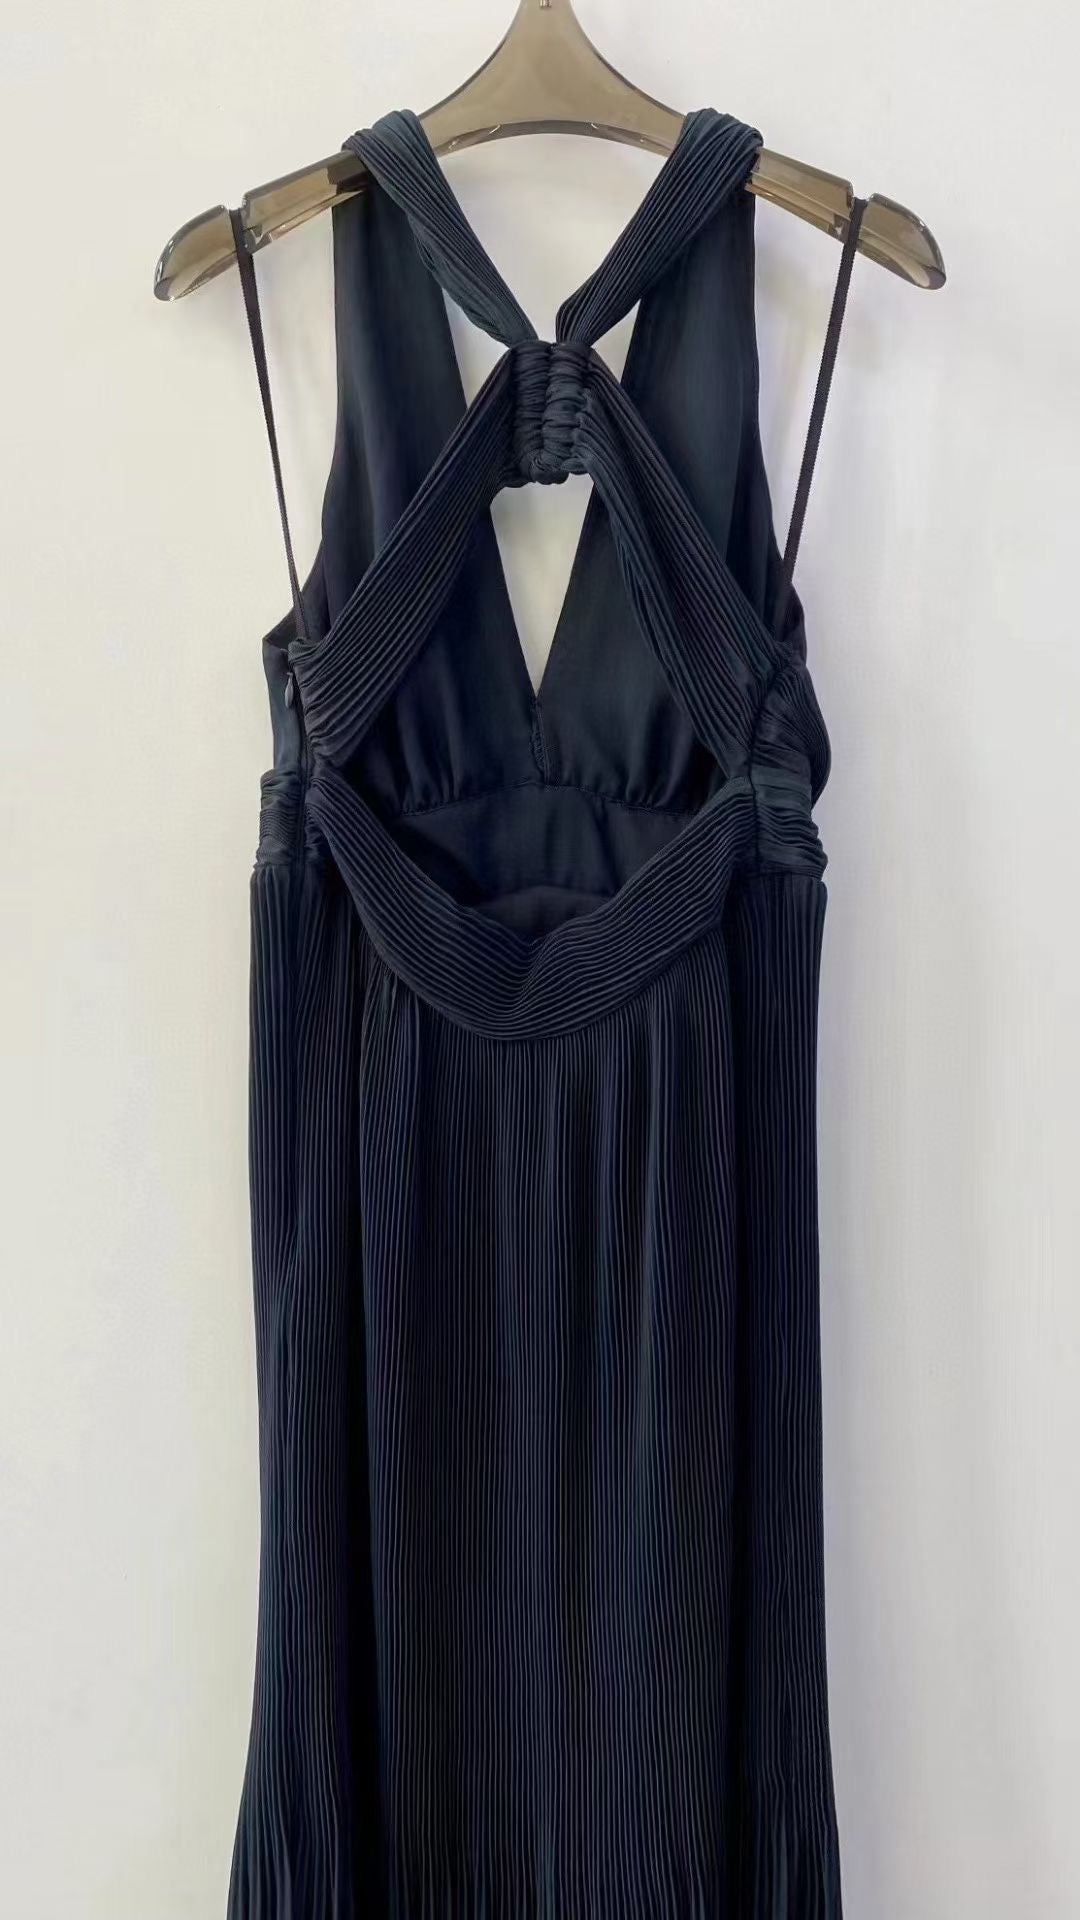 ALC Everly Pleated Maxi Gown Dress